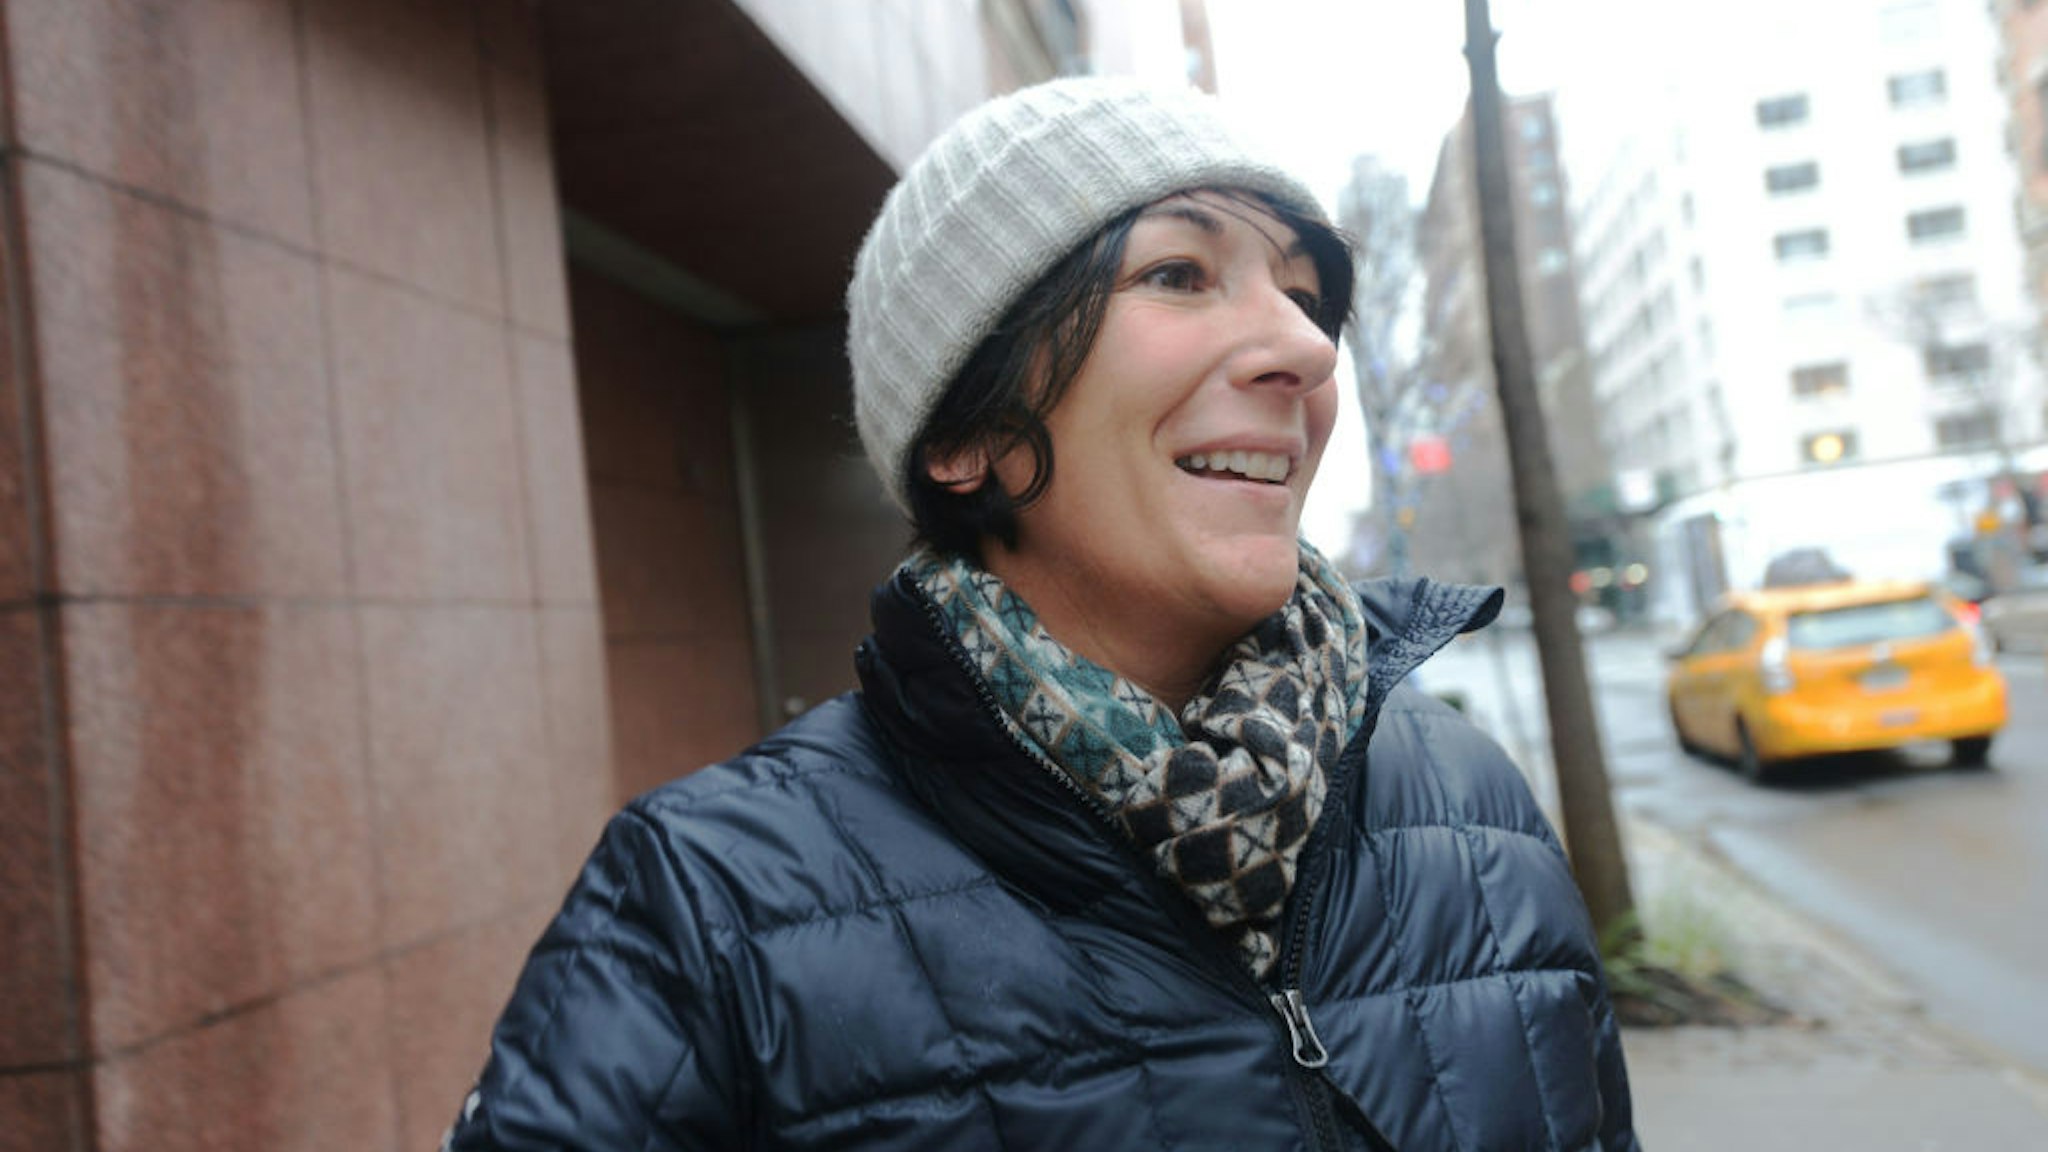 UNITED STATES -January 4: Ghislaine Maxwell, after walking out the side door of her East 65th Street townhouse in Manhattan on Sunday, January 4, 2015. (Photo by Andrew Savulich/NY Daily News Archive via Getty Images)